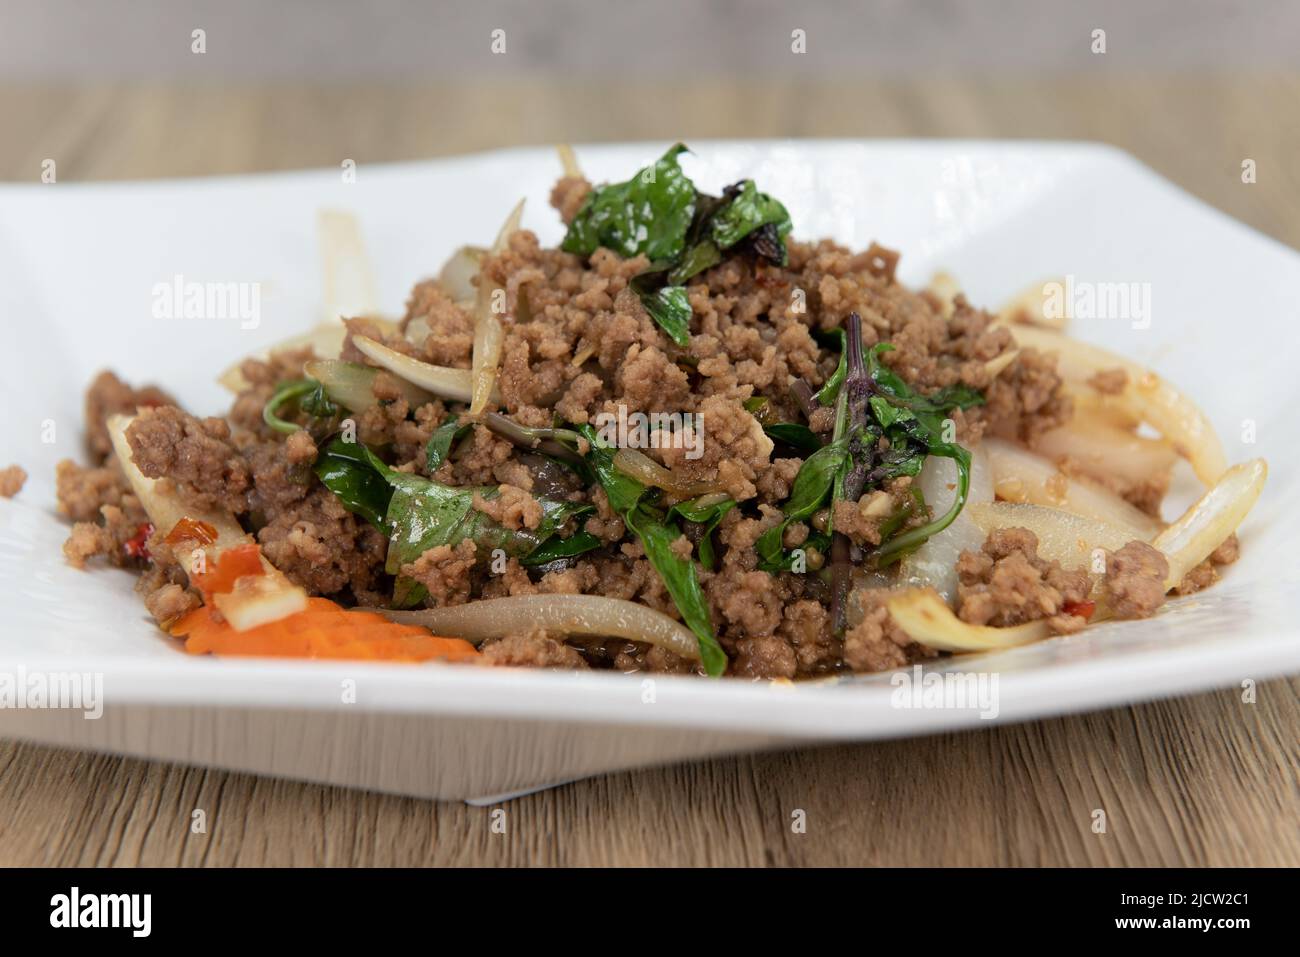 Tasty mint leaves stir fry with decorative garnishment served on a plate and ready to eat. Stock Photo